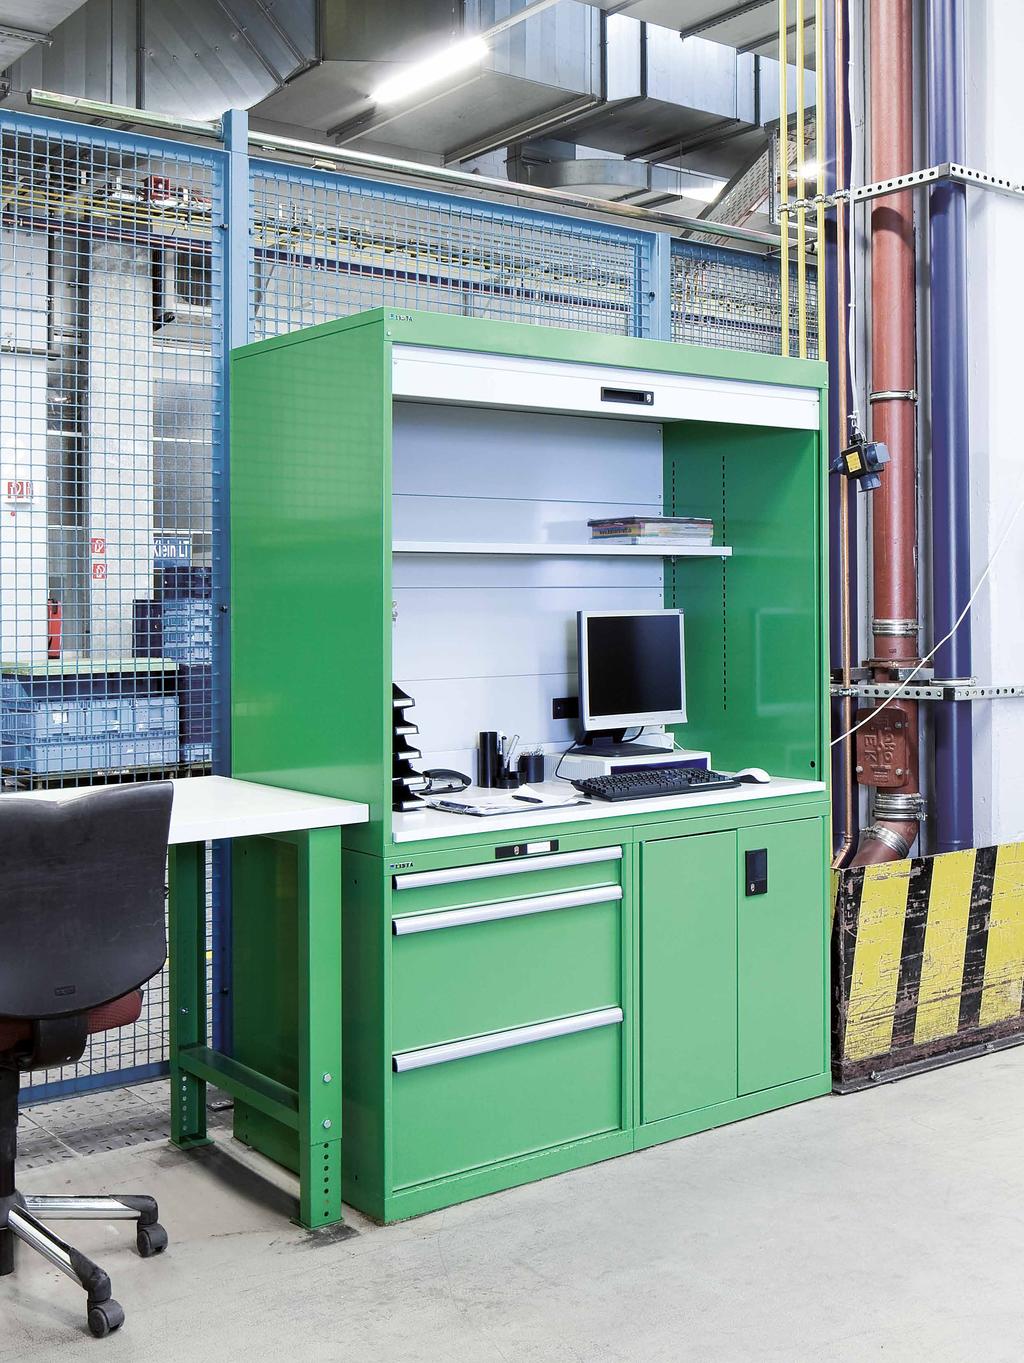 Test and inspection workstations With its modular test and inspection workstations, LISTA offers optimised solutions for modern quality assurance practices.